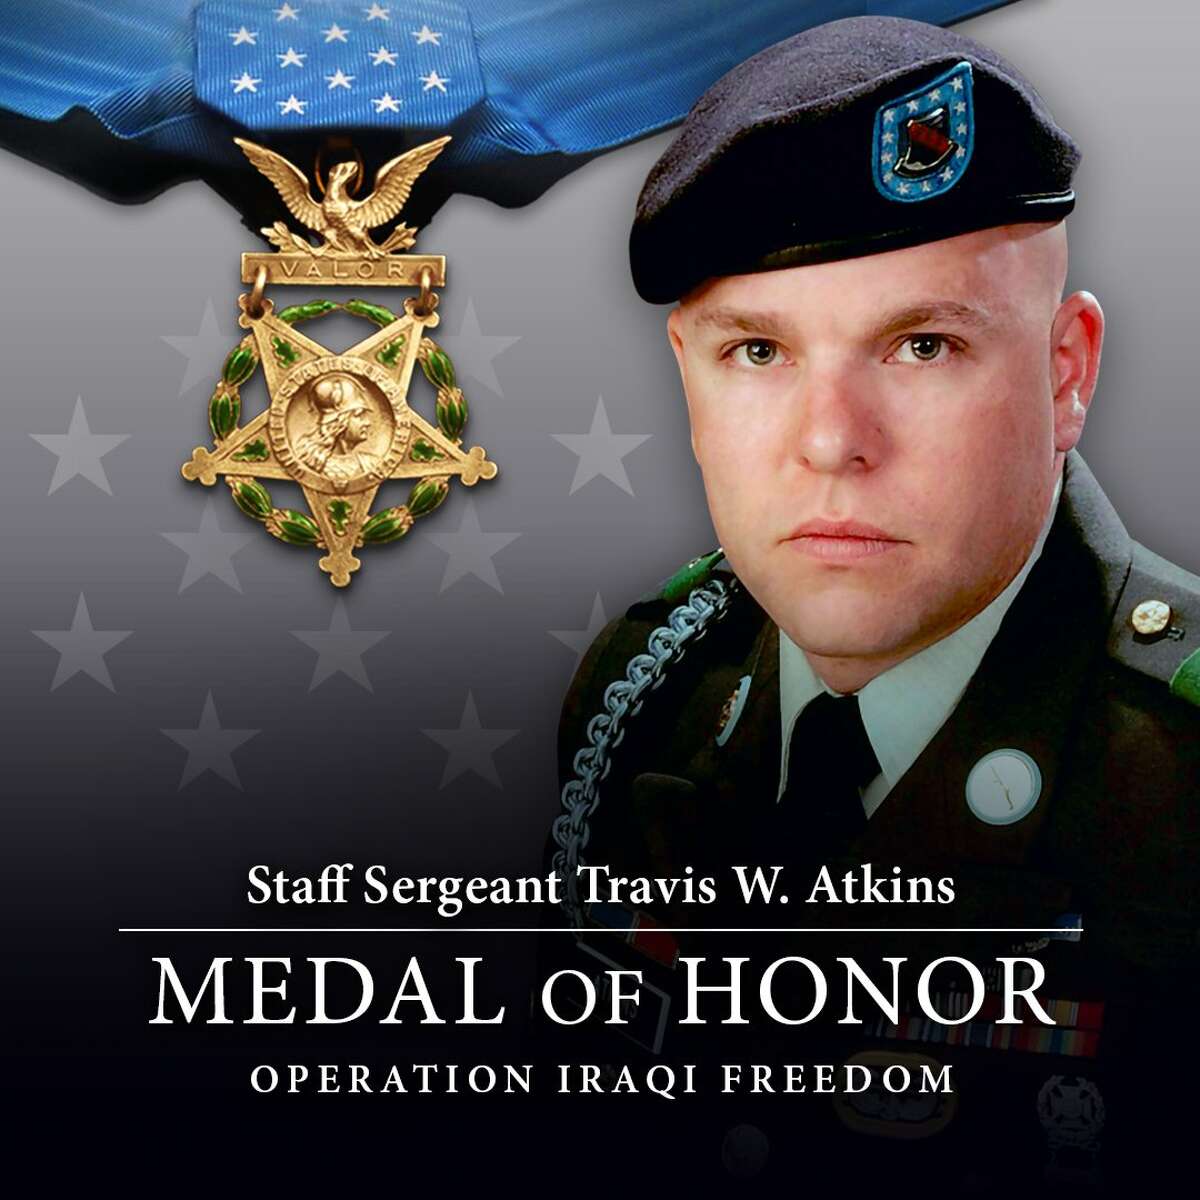 Staff Sgt. Atkins, of Bozeman, Montana, posthumously will become the fifth U.S. service member to receive the nation's highest award for combat valor, the Medal of Honor, for actions during the eight-year Iraq War. A member of the 10th Mountain Division of Fort Drum, New York, he is credited with saving the lives of Aijo and two other soldiers by smothering a suicide vest laced with grenades, worn by the man he body-slammed.